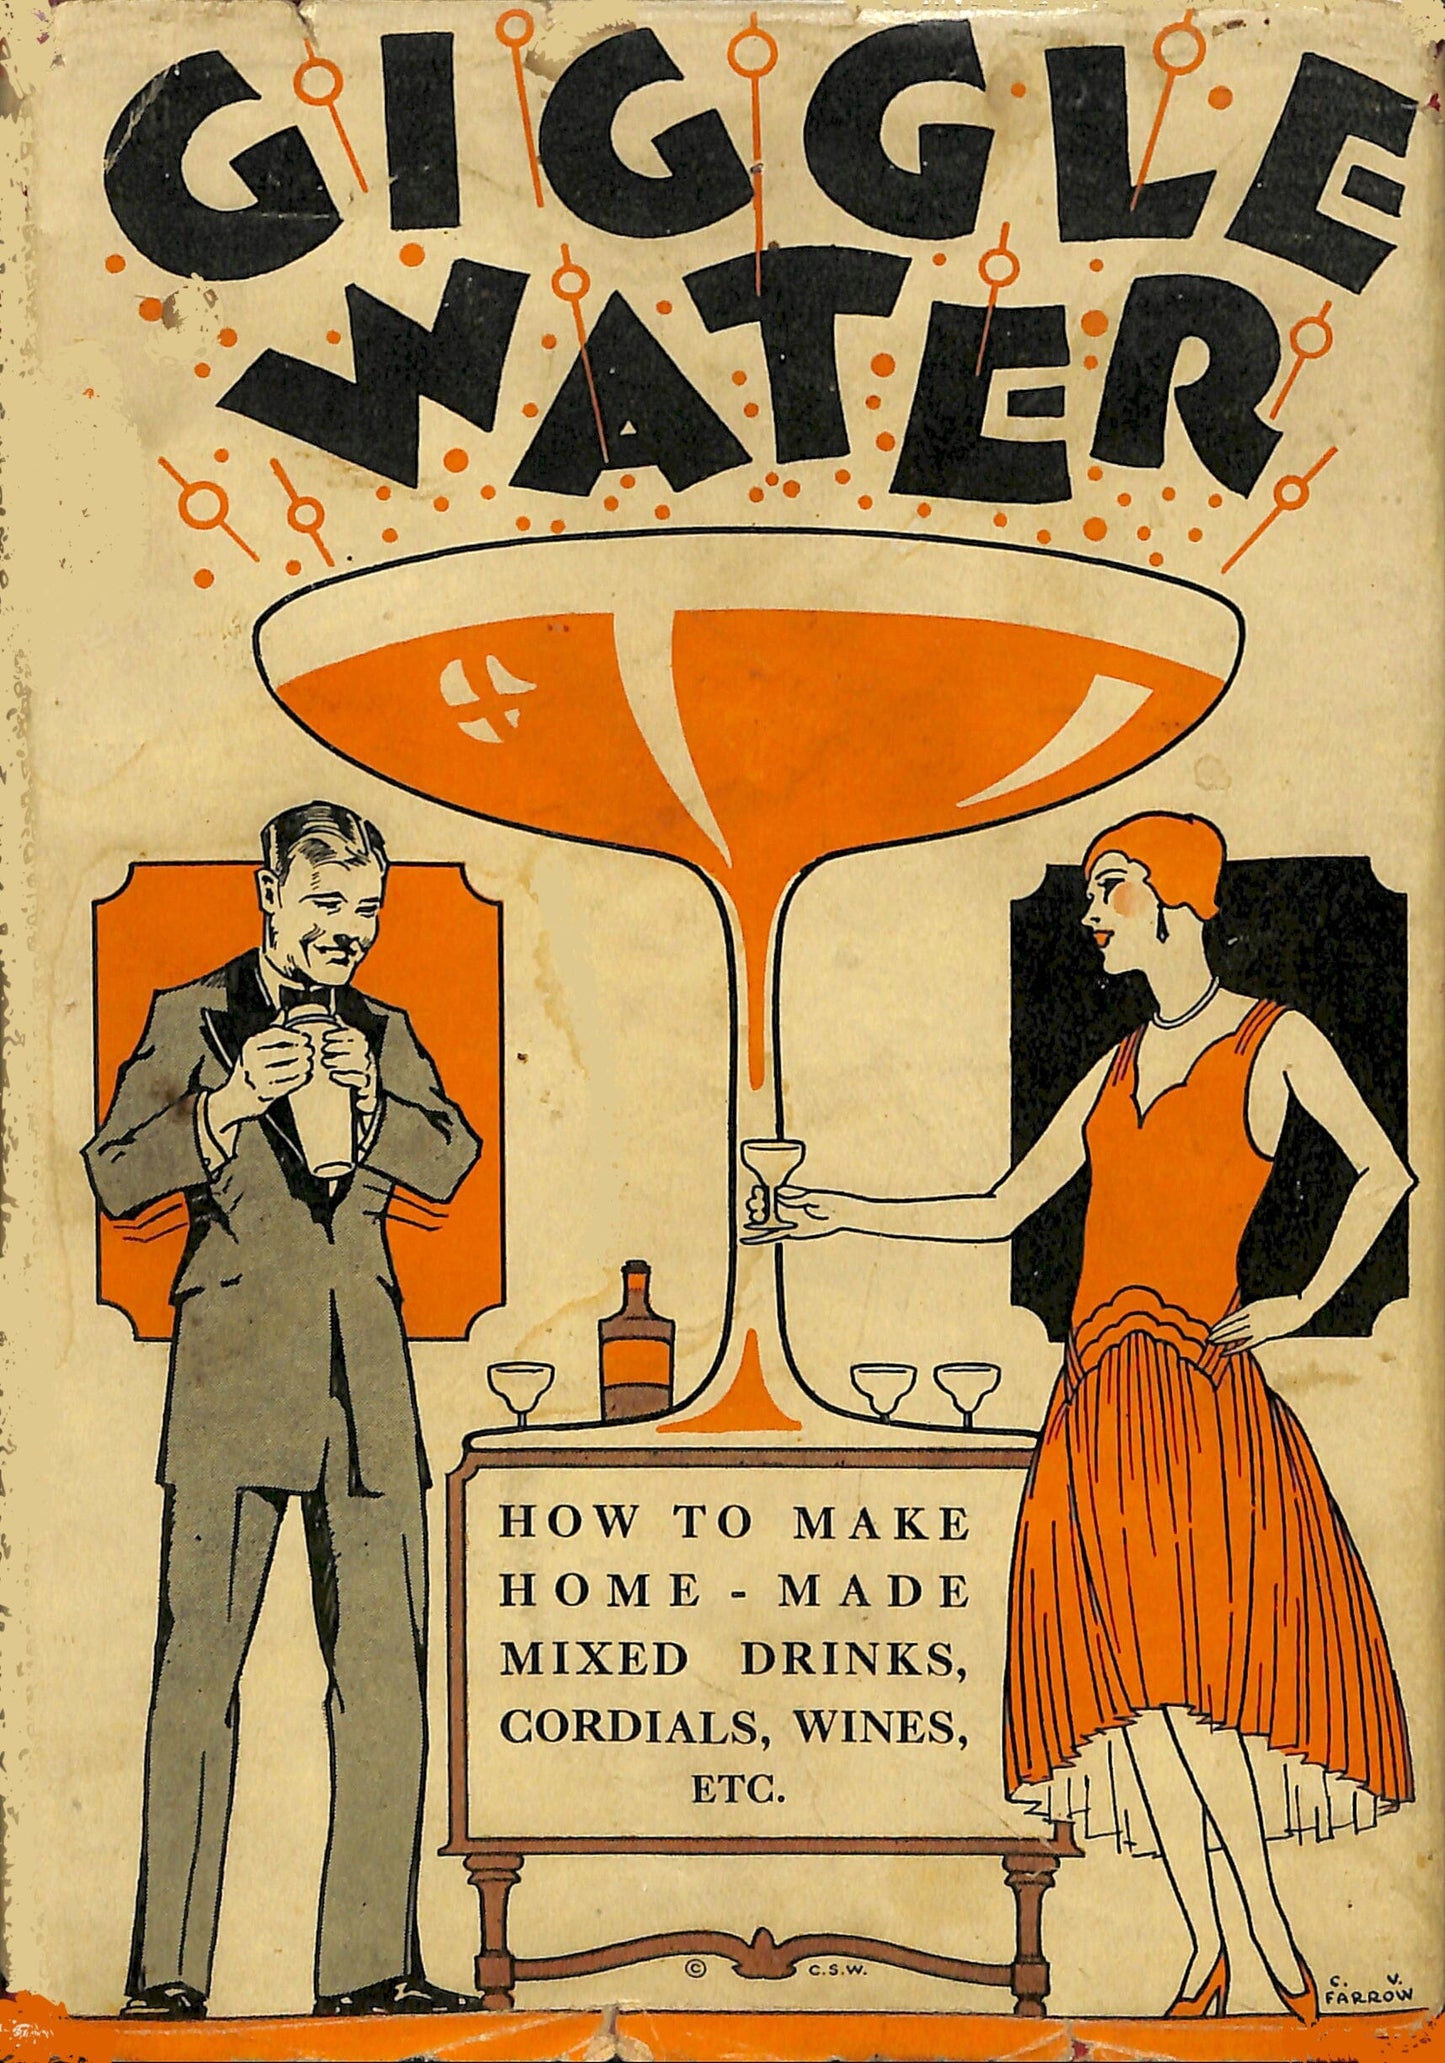 Giggle Water Cocktail Book Cover 1928 | Living room wall art print Posters, Prints, & Visual Artwork The Trumpet Shop   